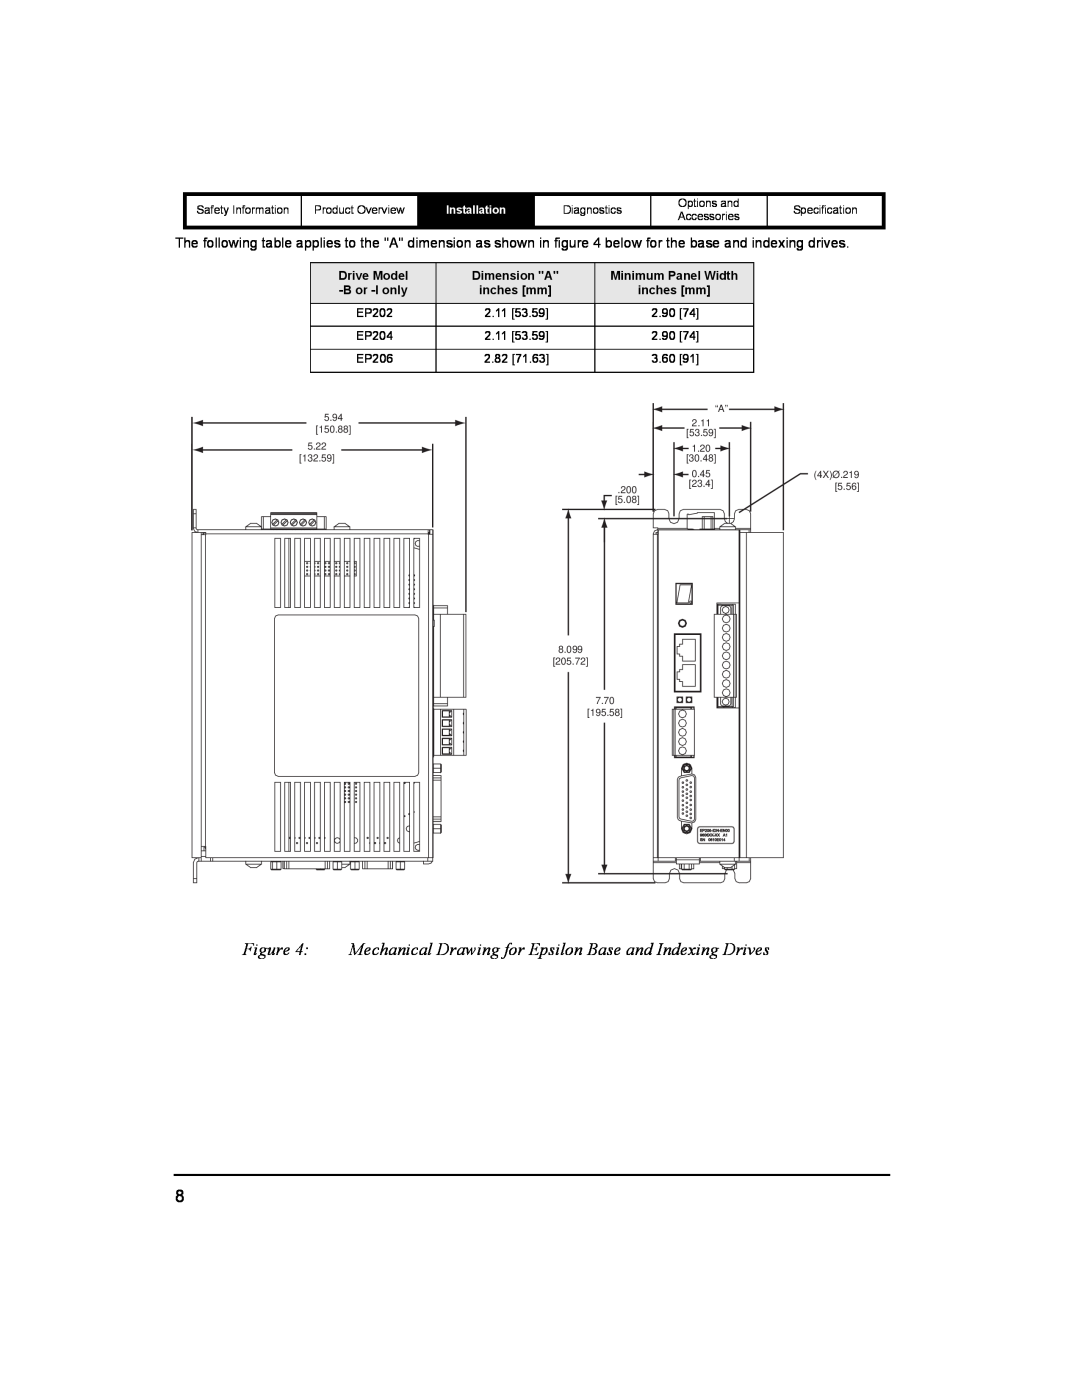 Emerson 400518-01 installation manual Mechanical Drawing for Epsilon Base and Indexing Drives, Installation, B or -I only 